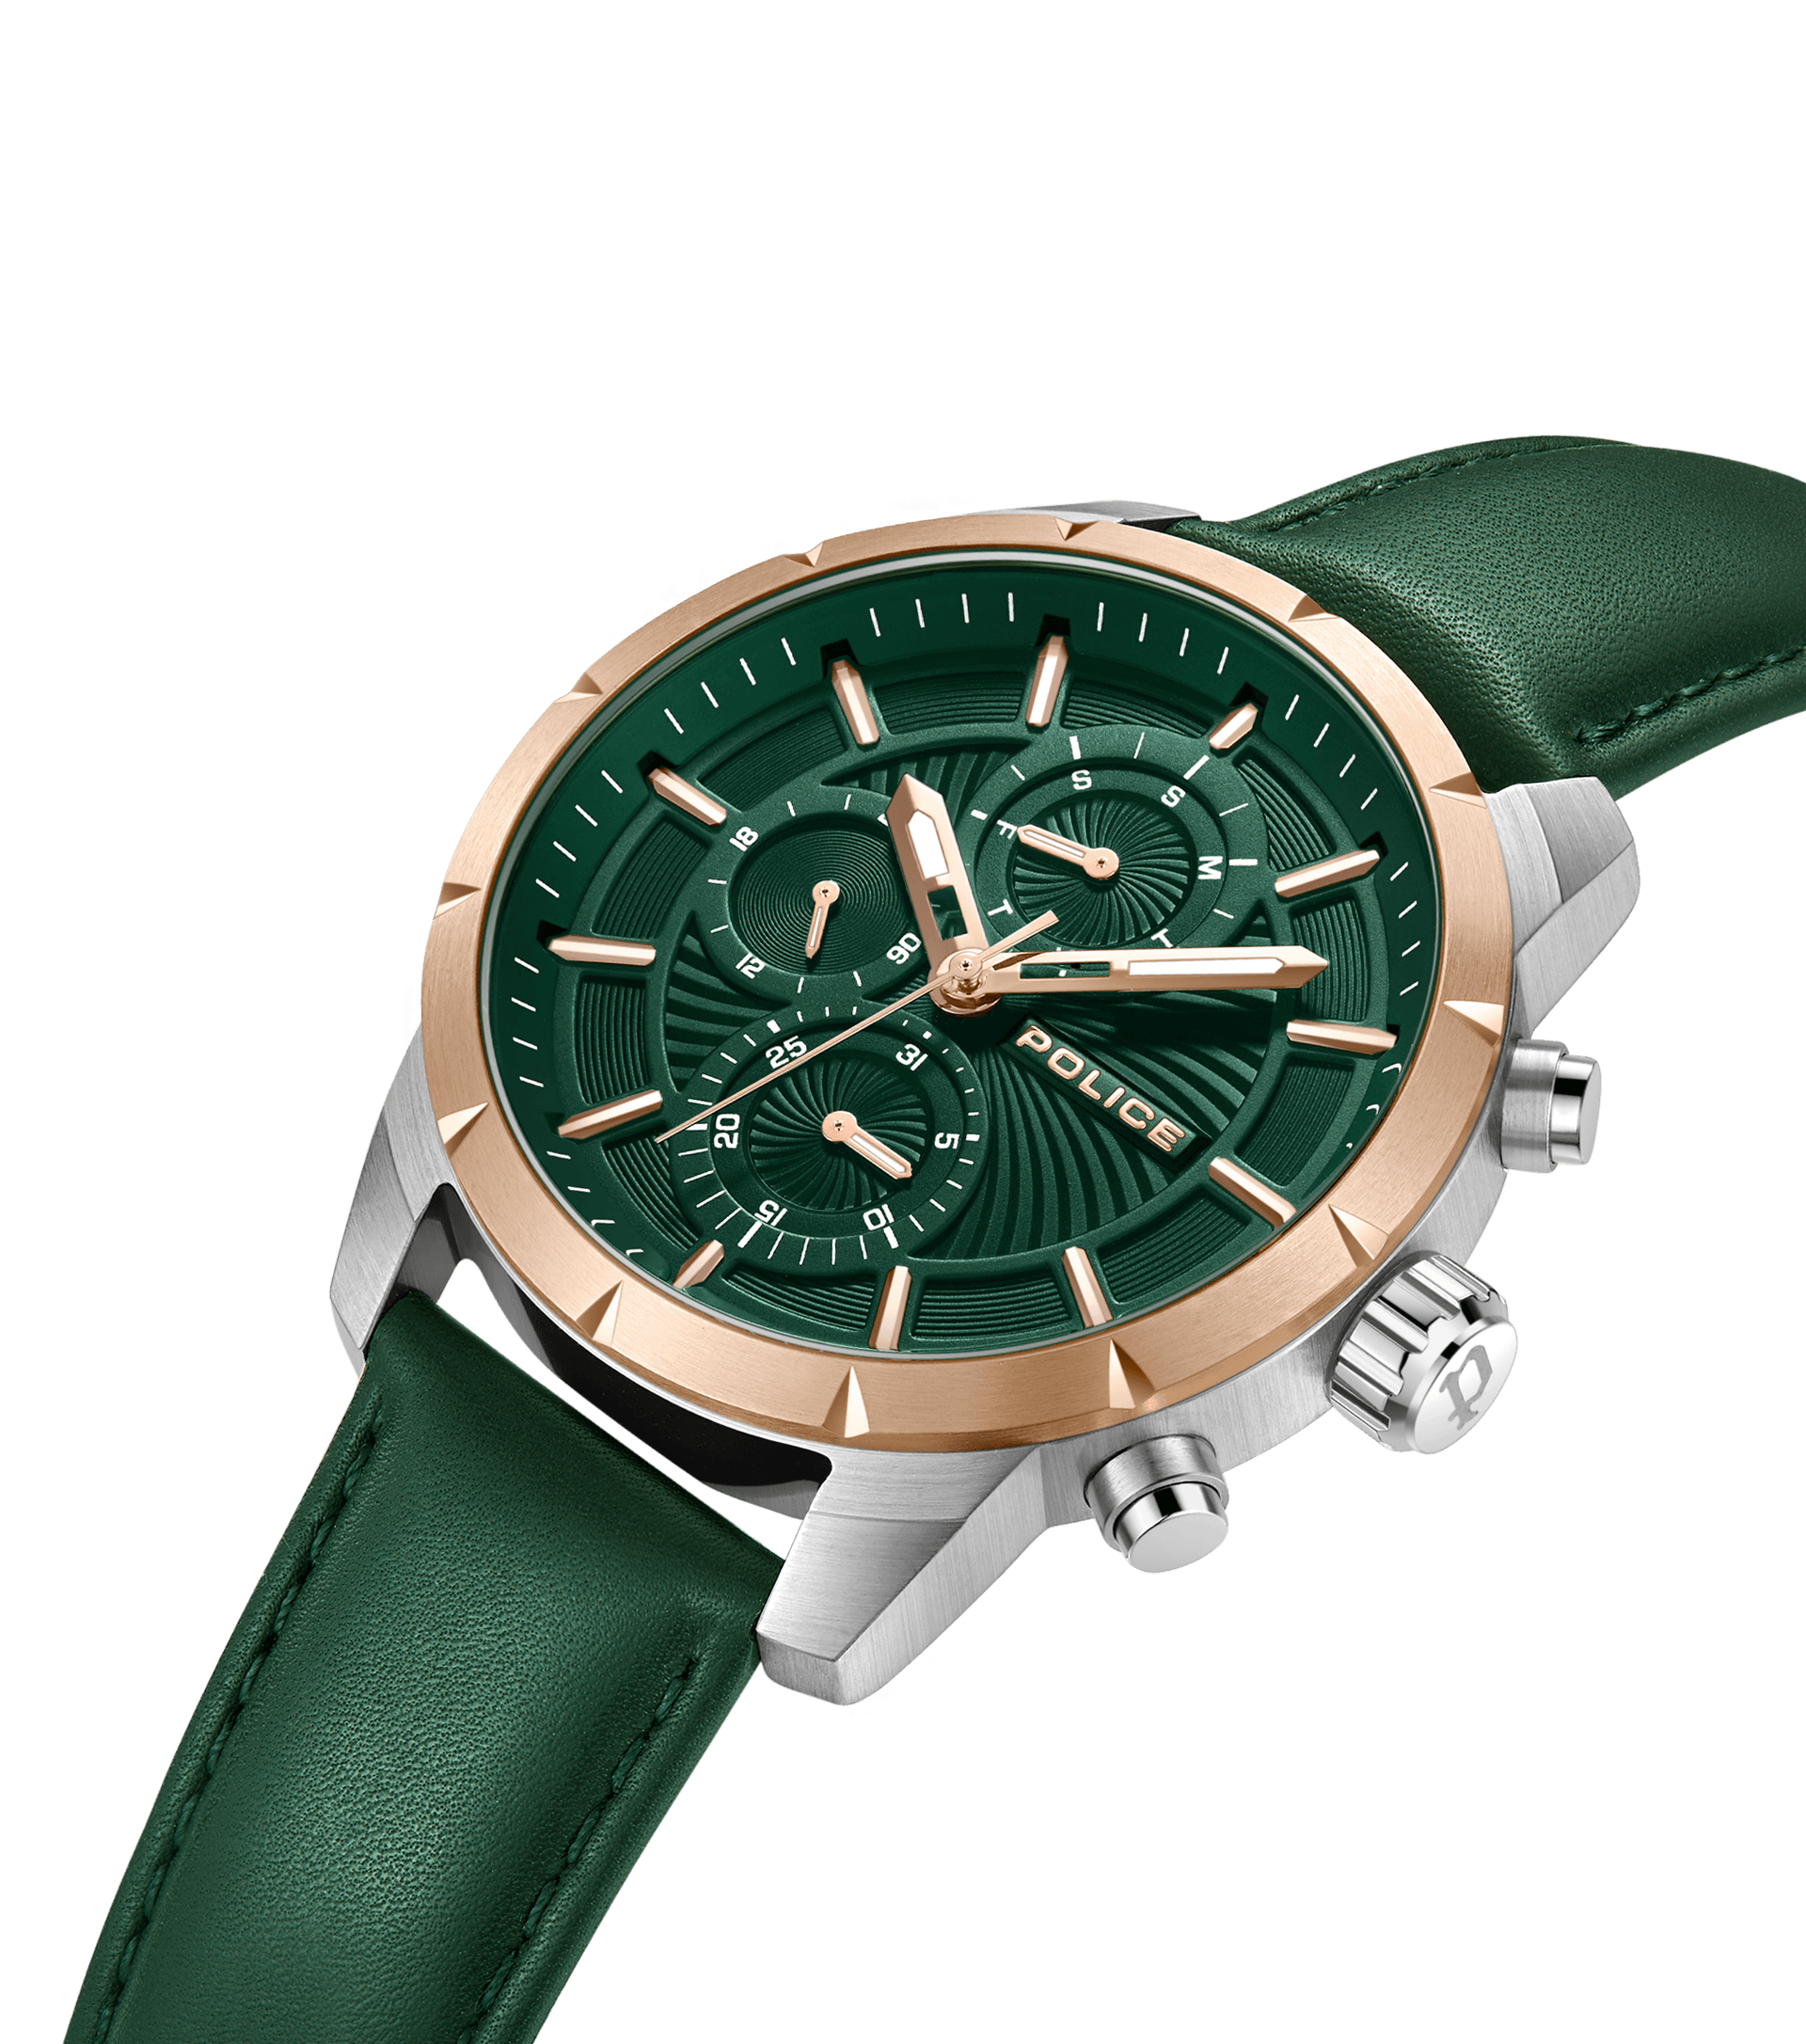 Men Neist Police - Police watches For Green, Watch By Silverandrosegold